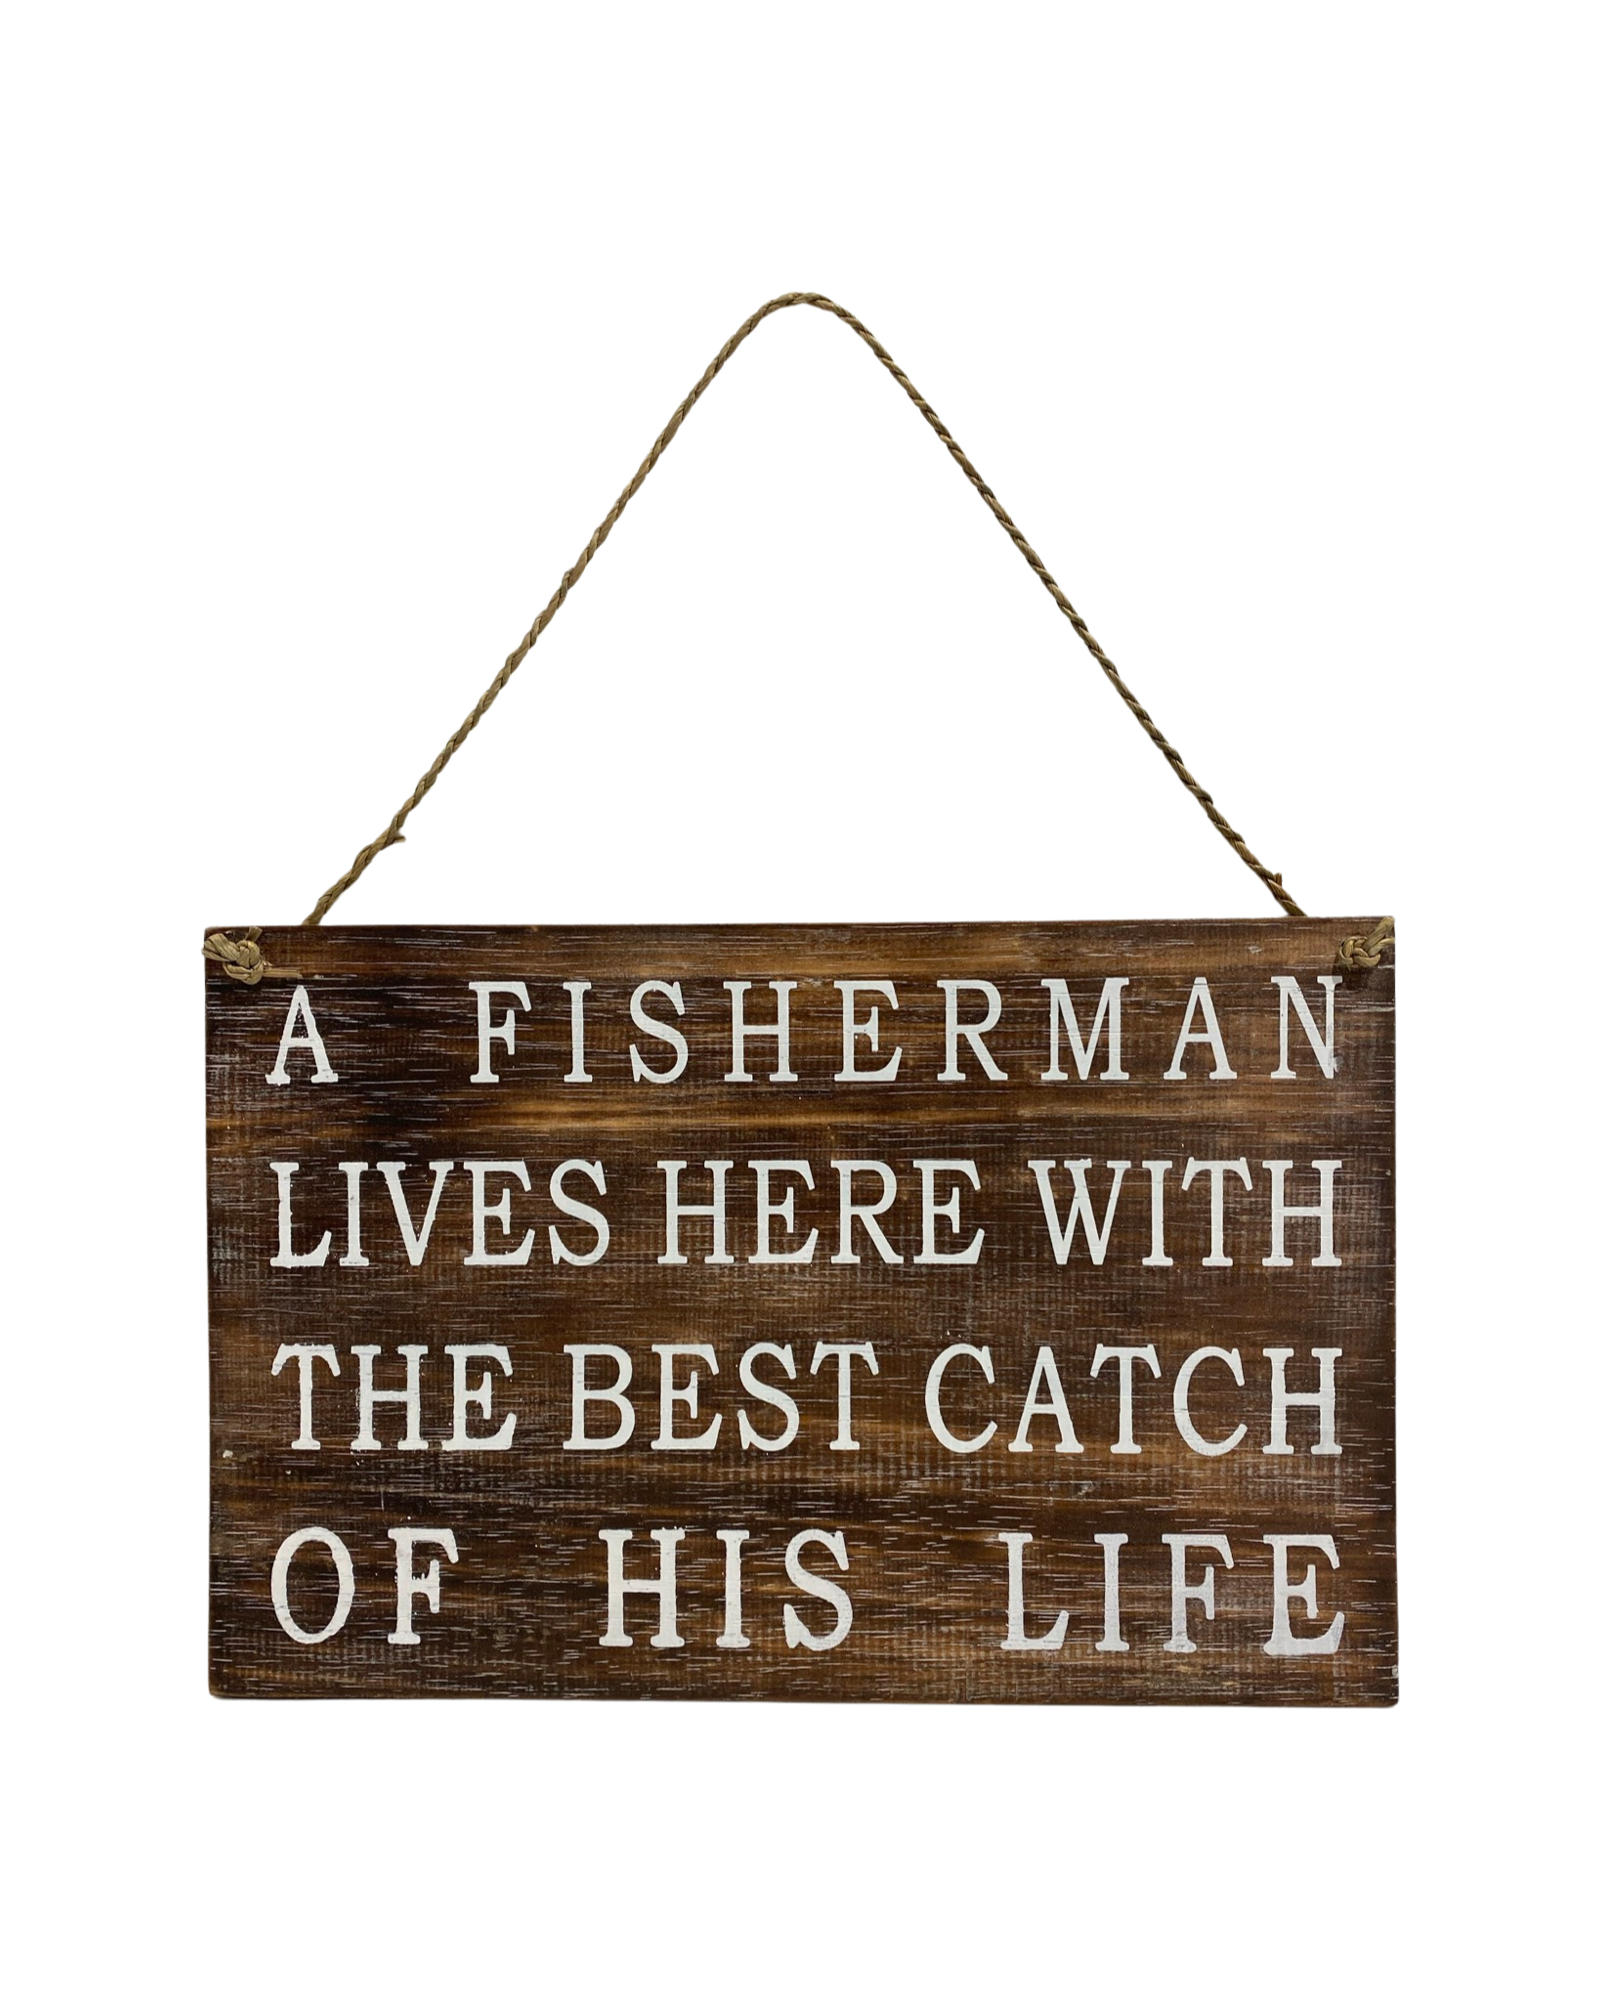 A Great Fisherman Lives Here With the Catch of His Life